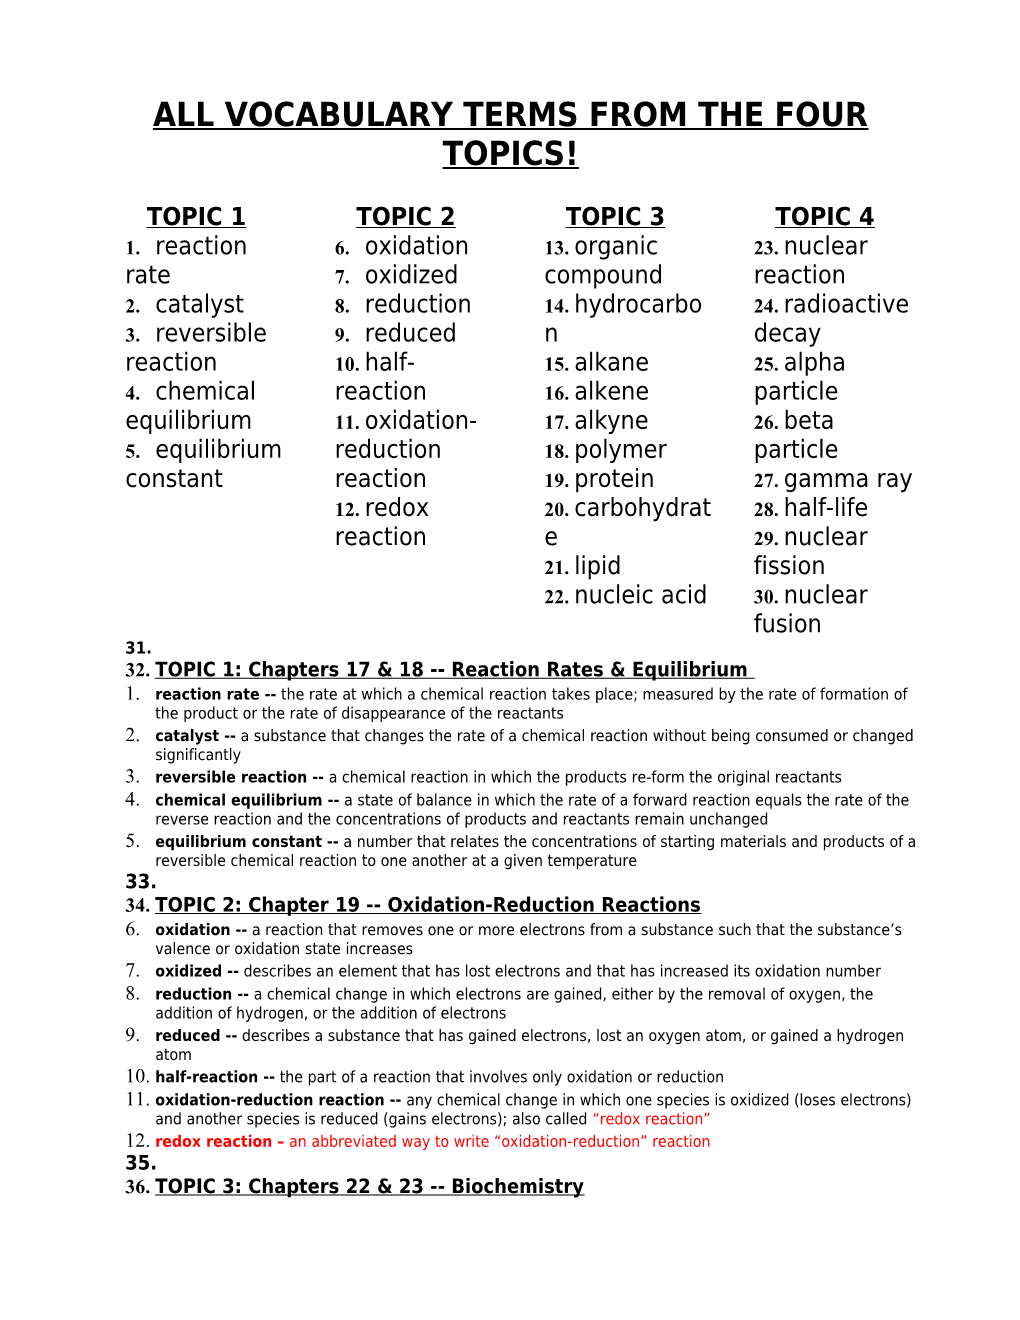 All Vocabulary Terms from the Four Topics!